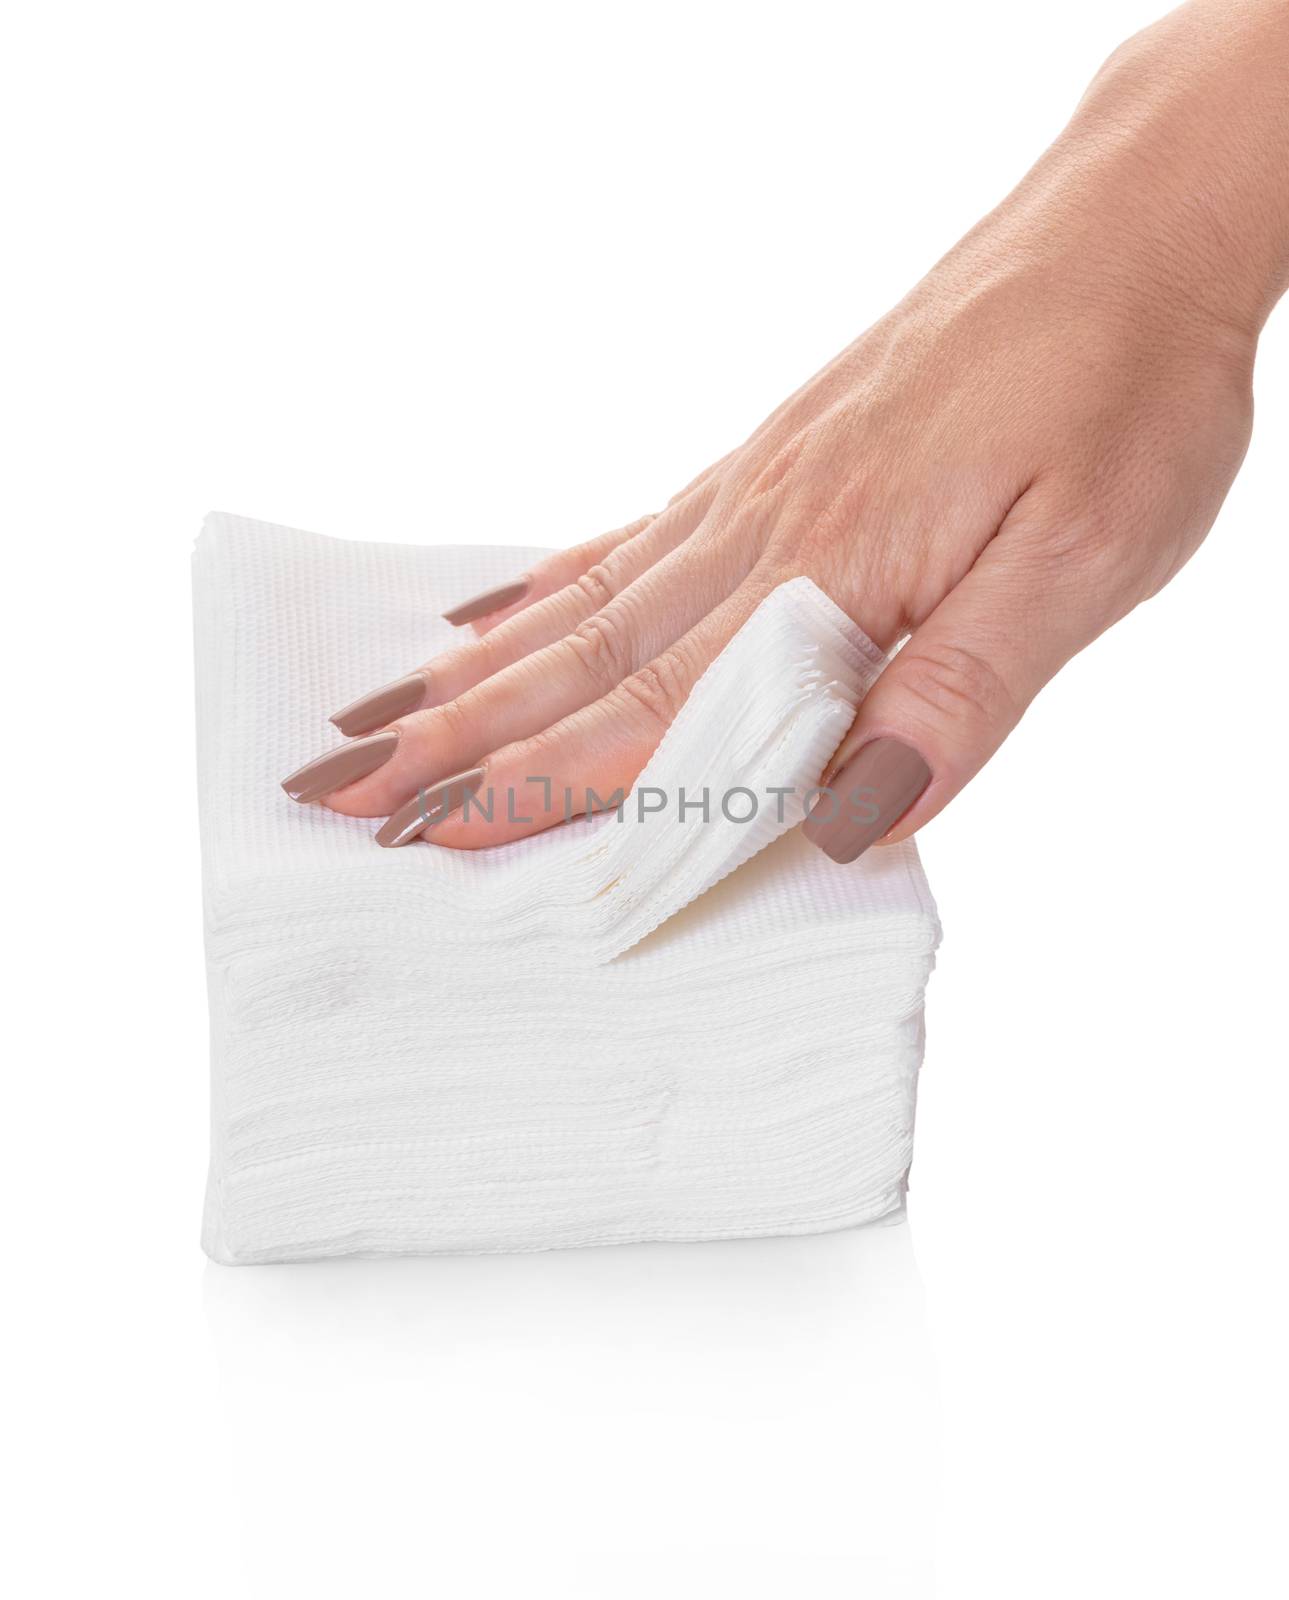 pack of napkins in hand on white background isolated